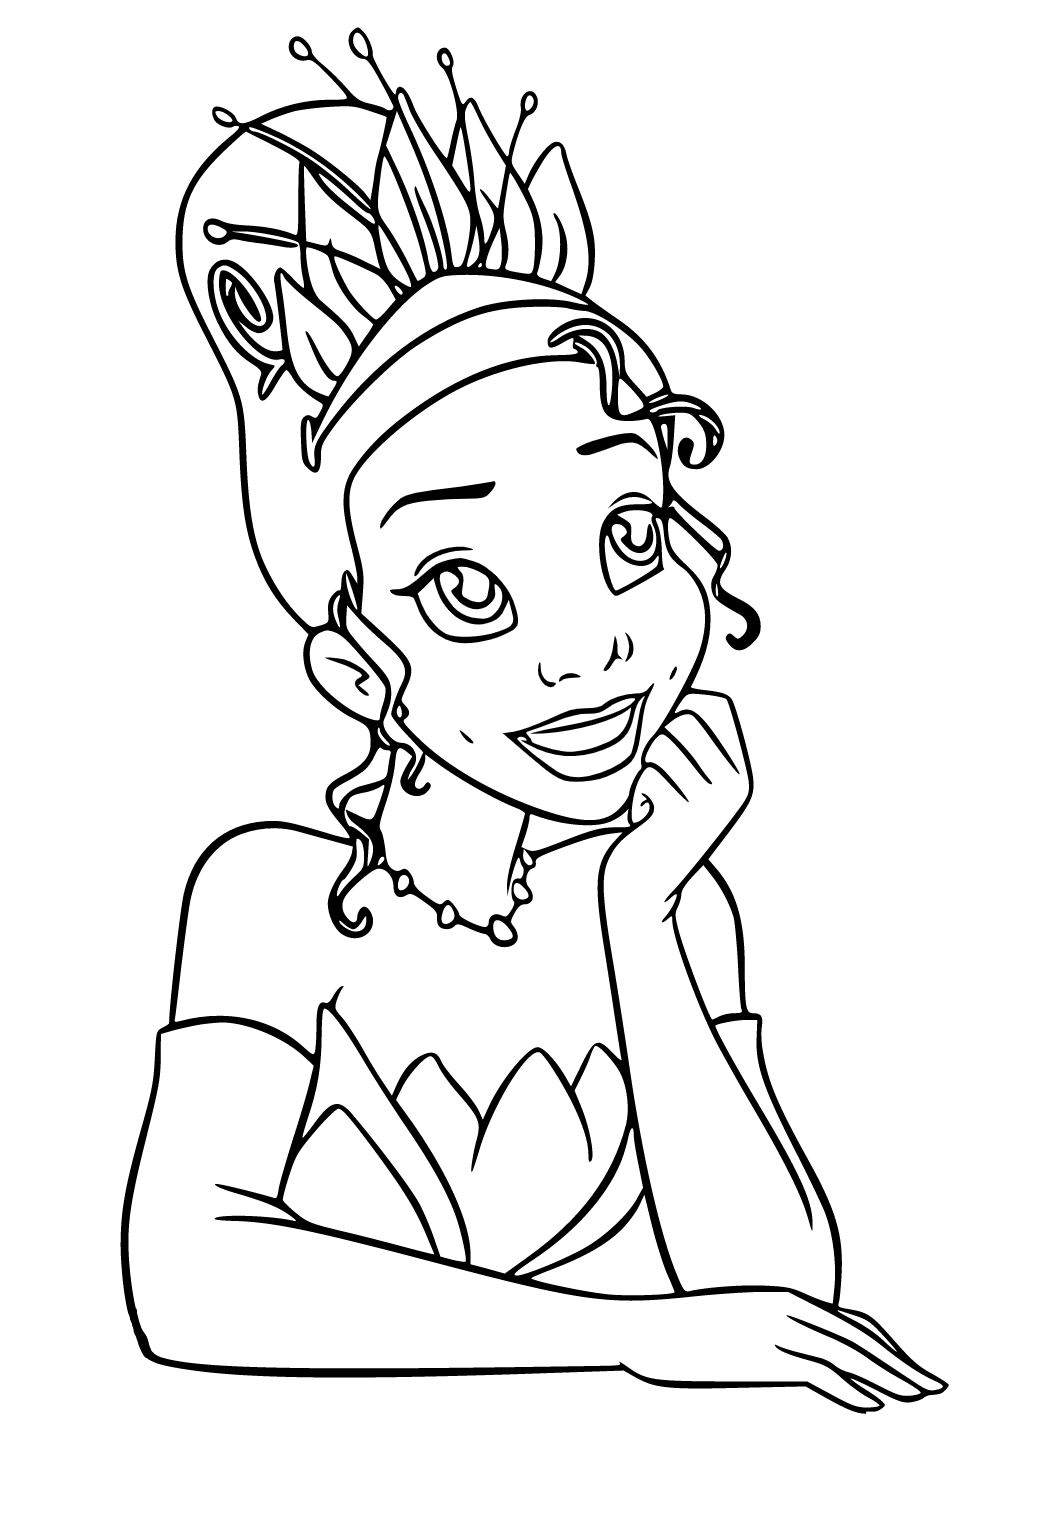 Free printable tiana crown coloring page for adults and kids